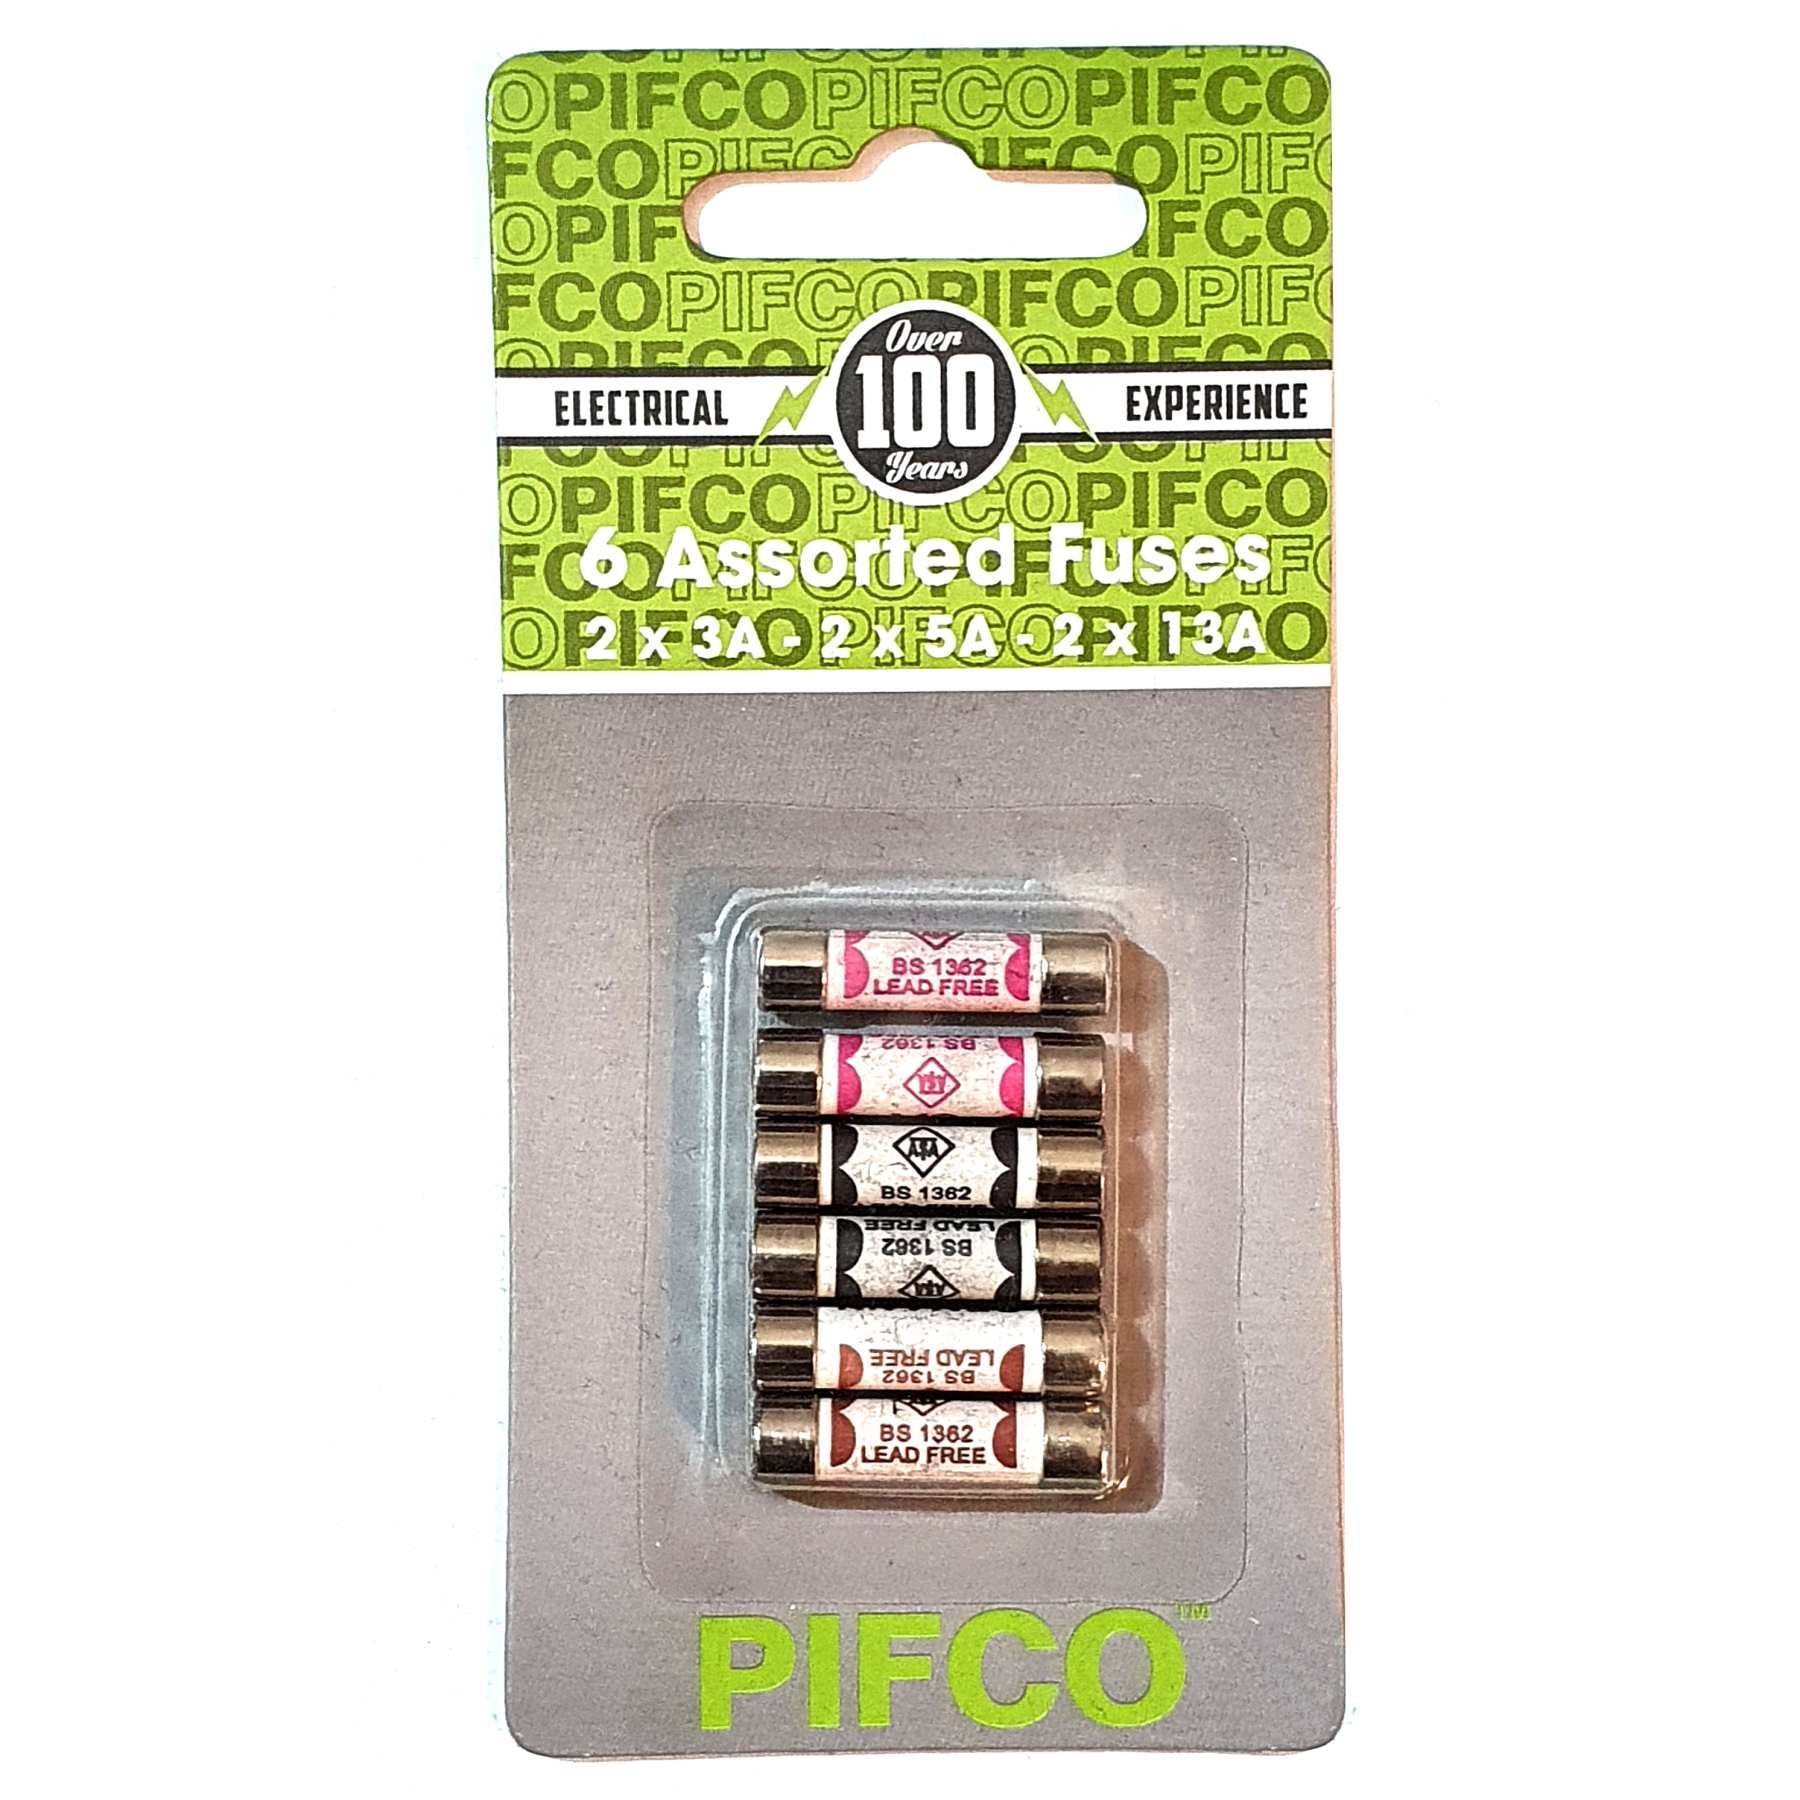 Pack of 6 assorted household electrical appliance fuses 3A 5A and 13A